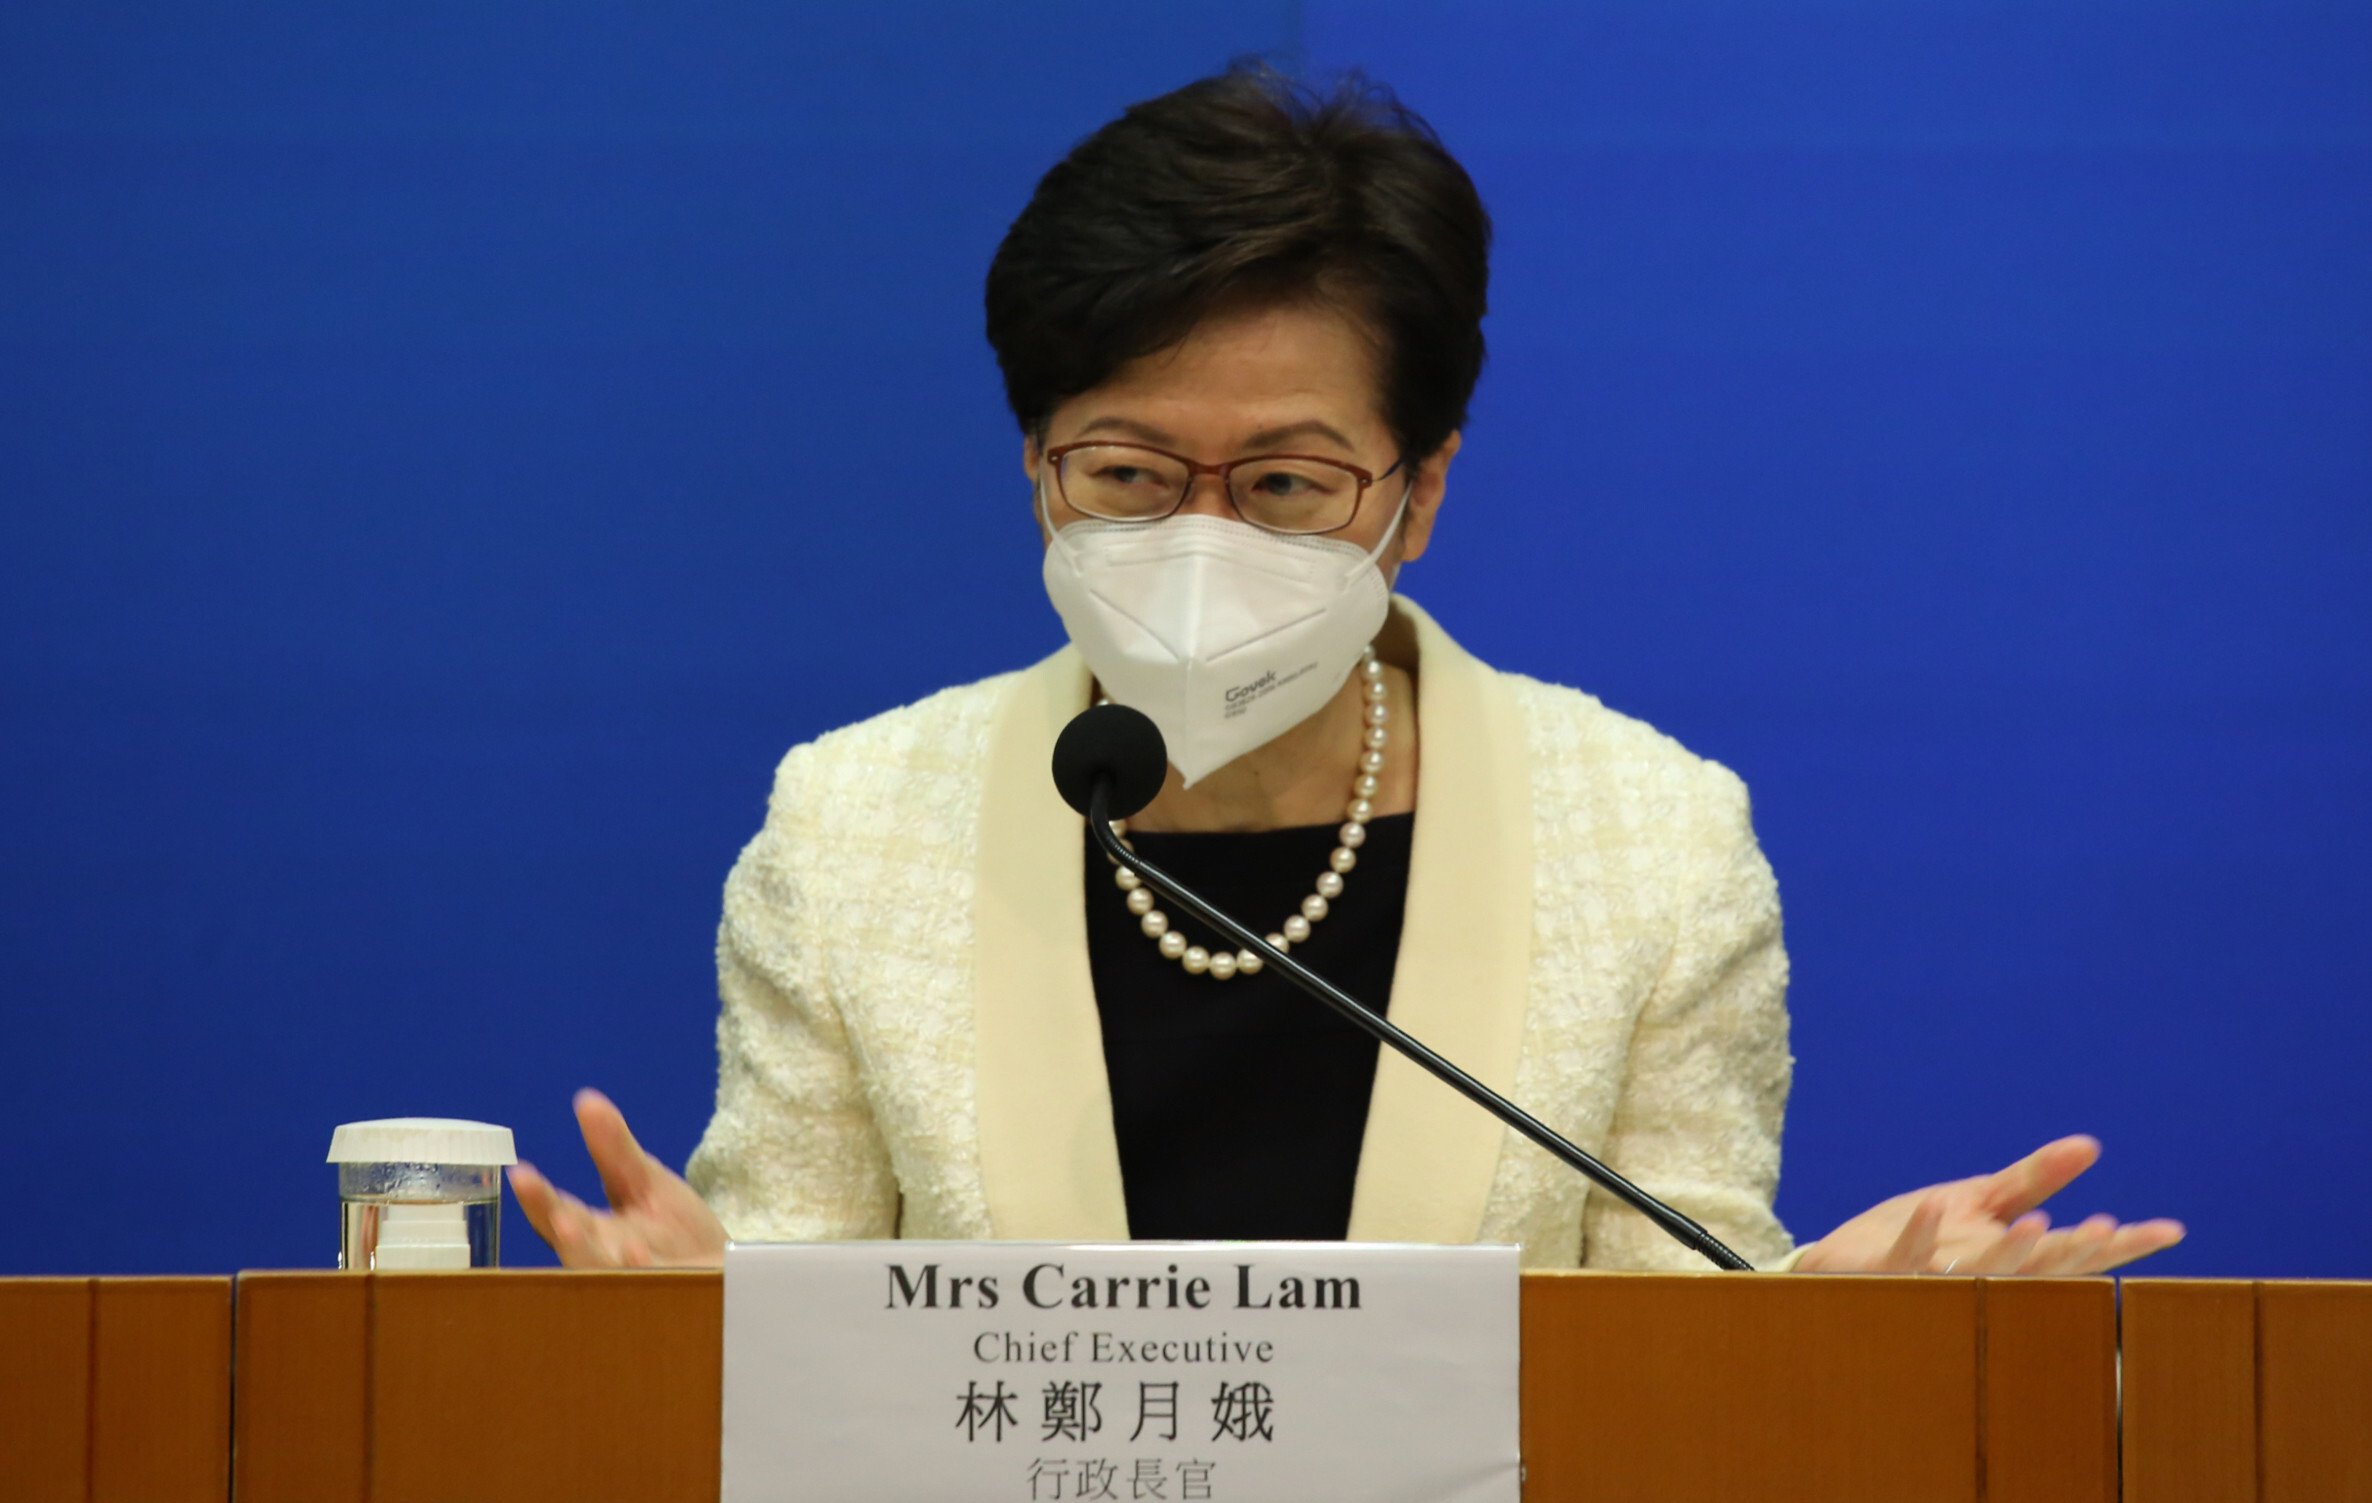 City leader Carrie Lam has said plans to resume in-person teaching at schools will be unveiled later in the week. Photo: Handout